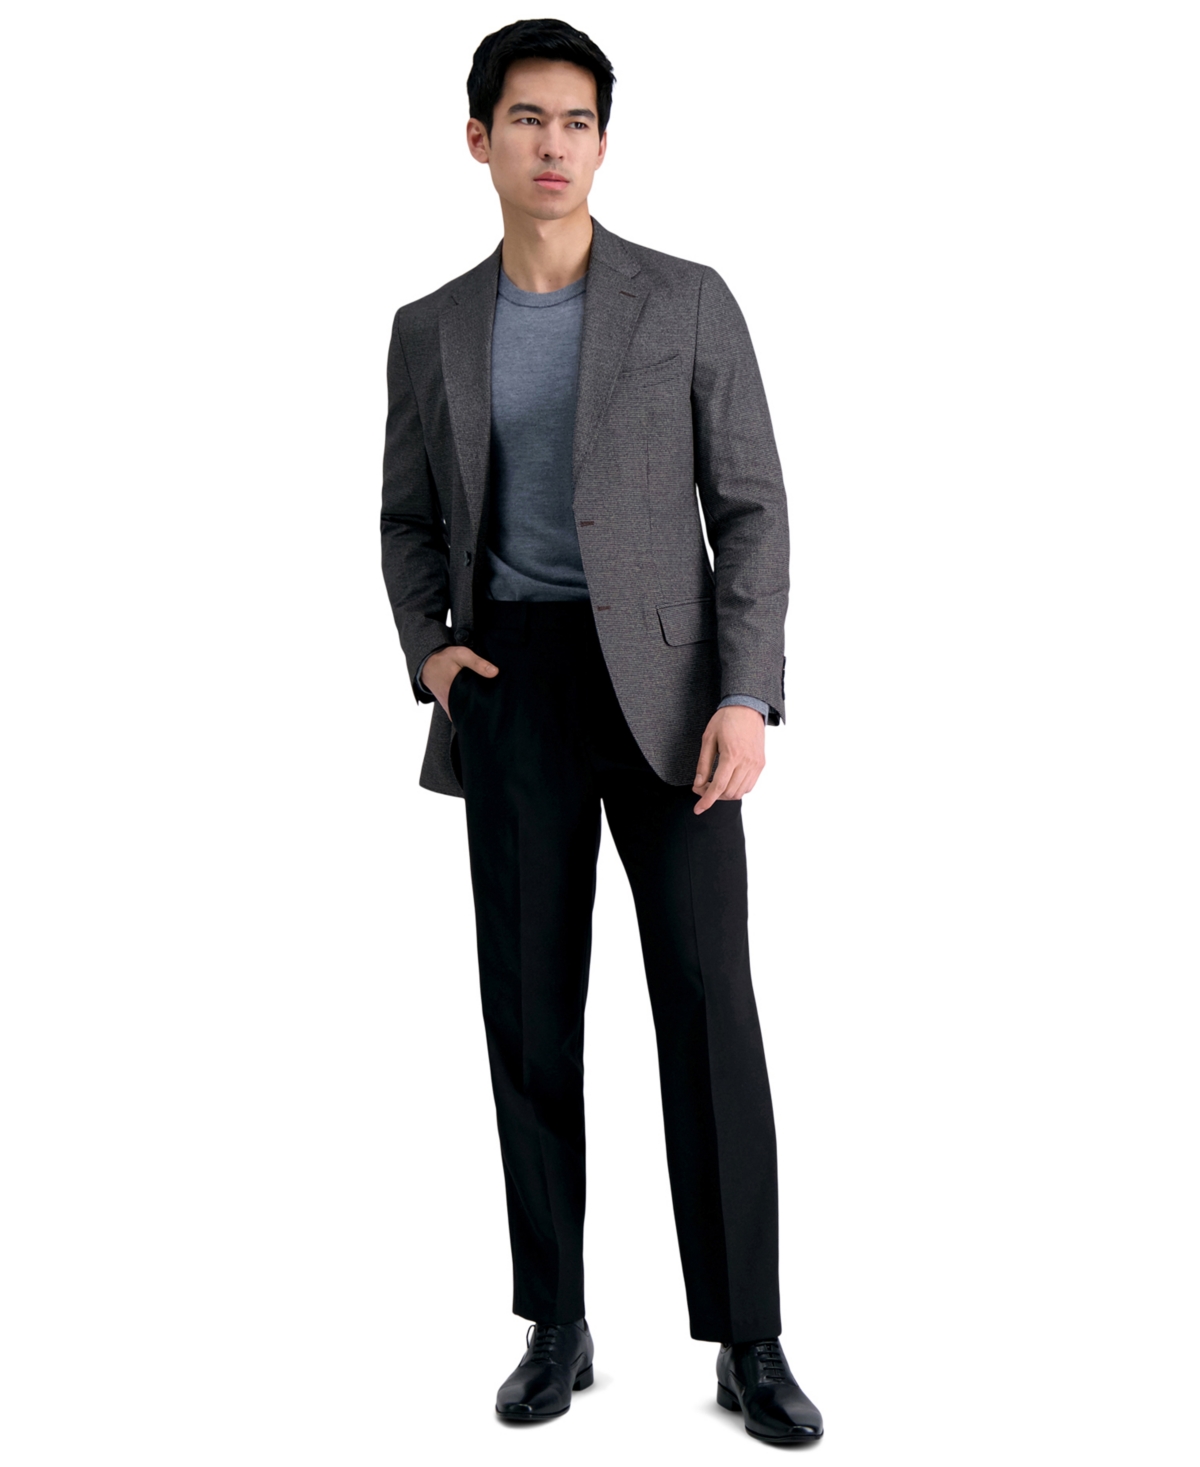 Men's Premium Comfort Straight-Fit 4-Way Stretch Wrinkle-Free Flat-Front Dress Pants - Charcoal